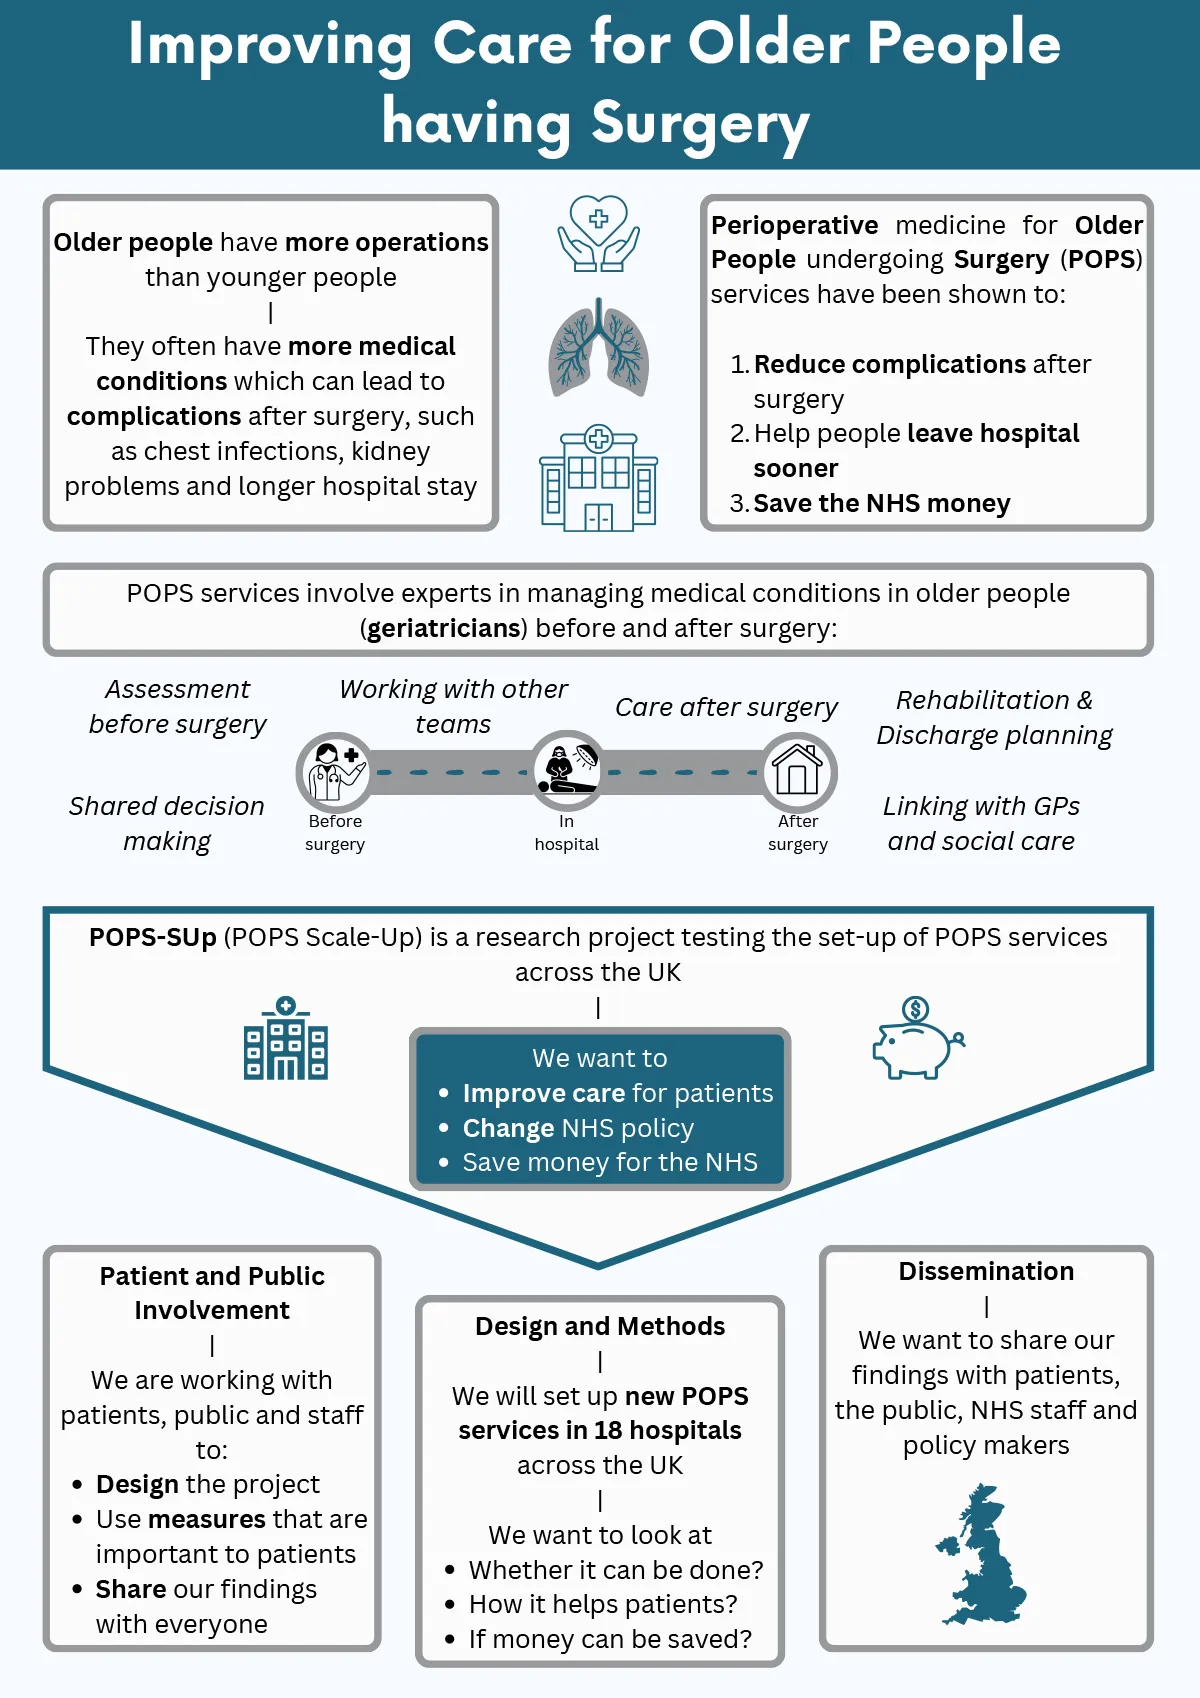 poster titled 'Improving care for older people having surgery'. Poster details the reasons behind the statement, the details of the surgery process and the work done by the team to improve the care for older people.